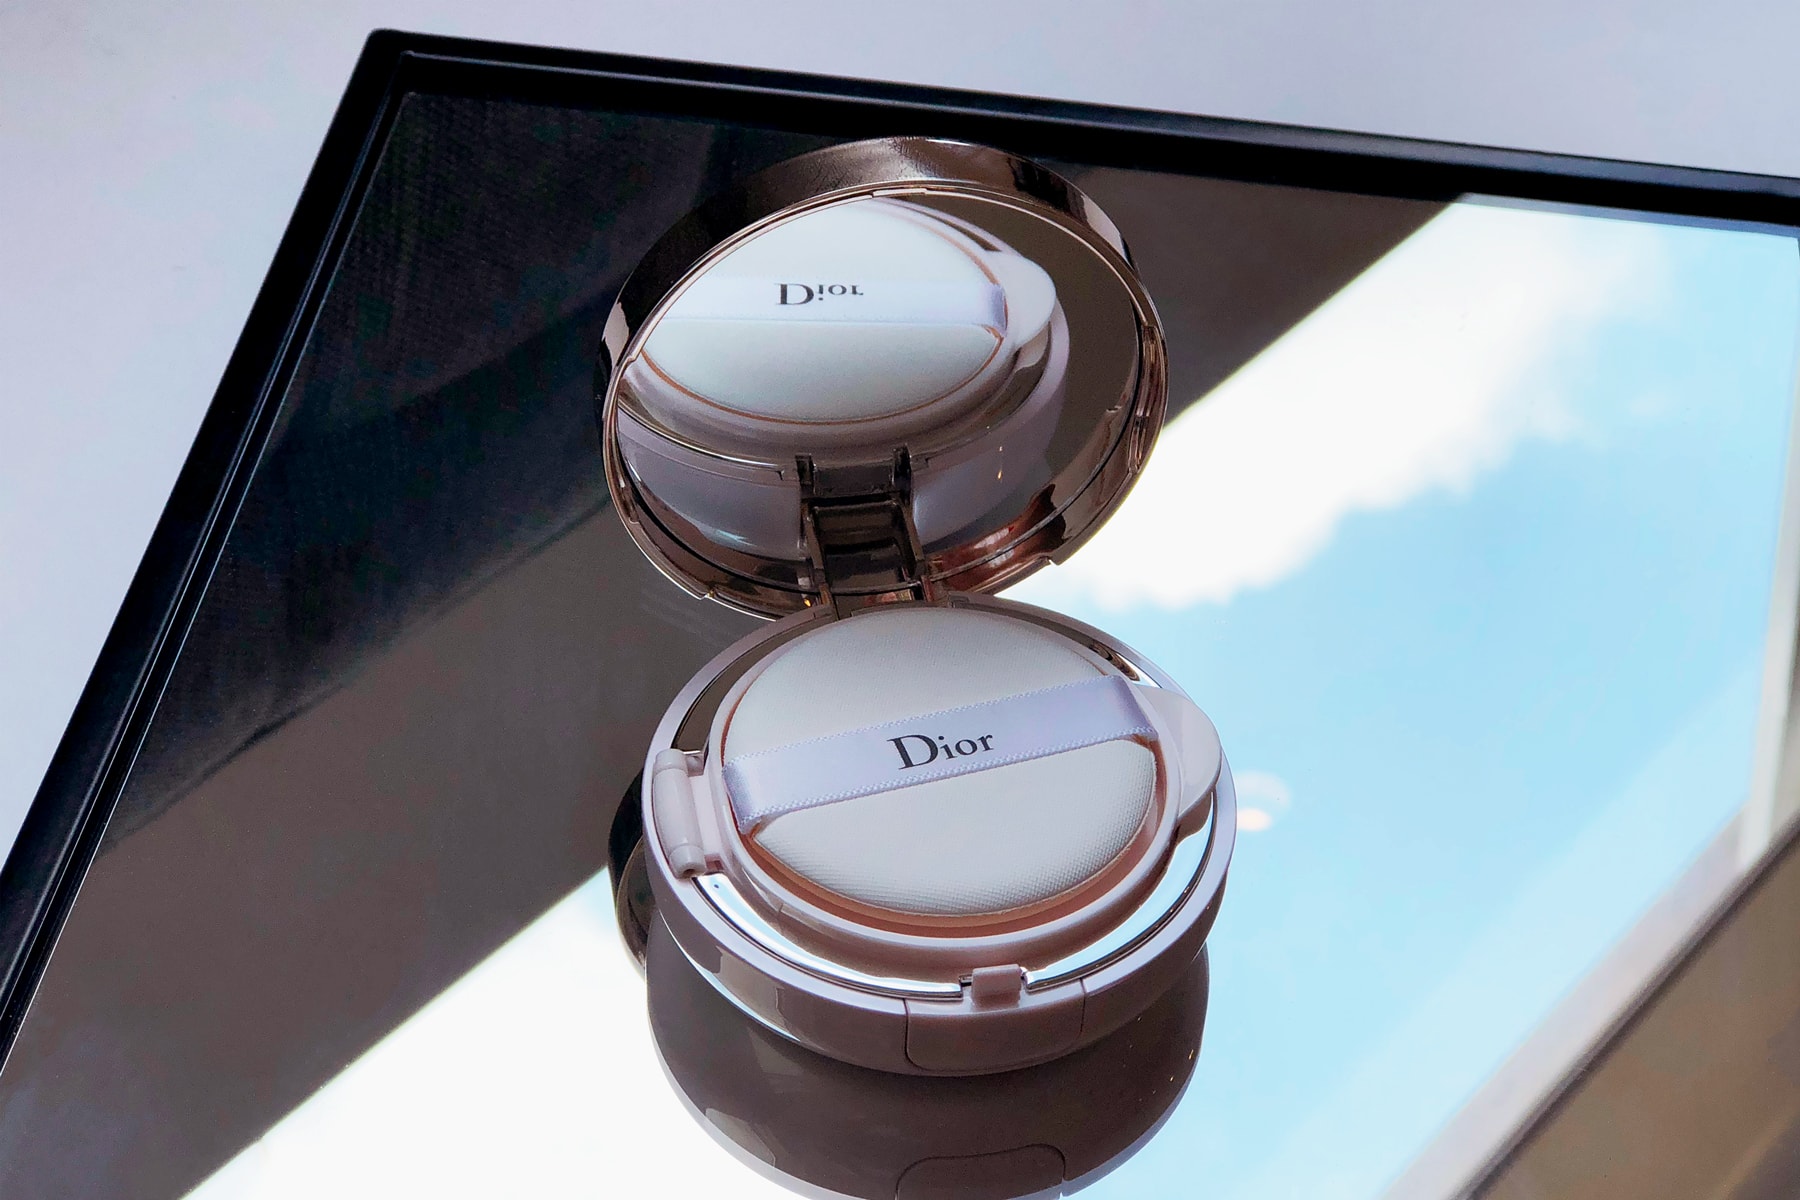 dior makeup dreamskin moist perfect cushion perfect skin creator compact foundation review